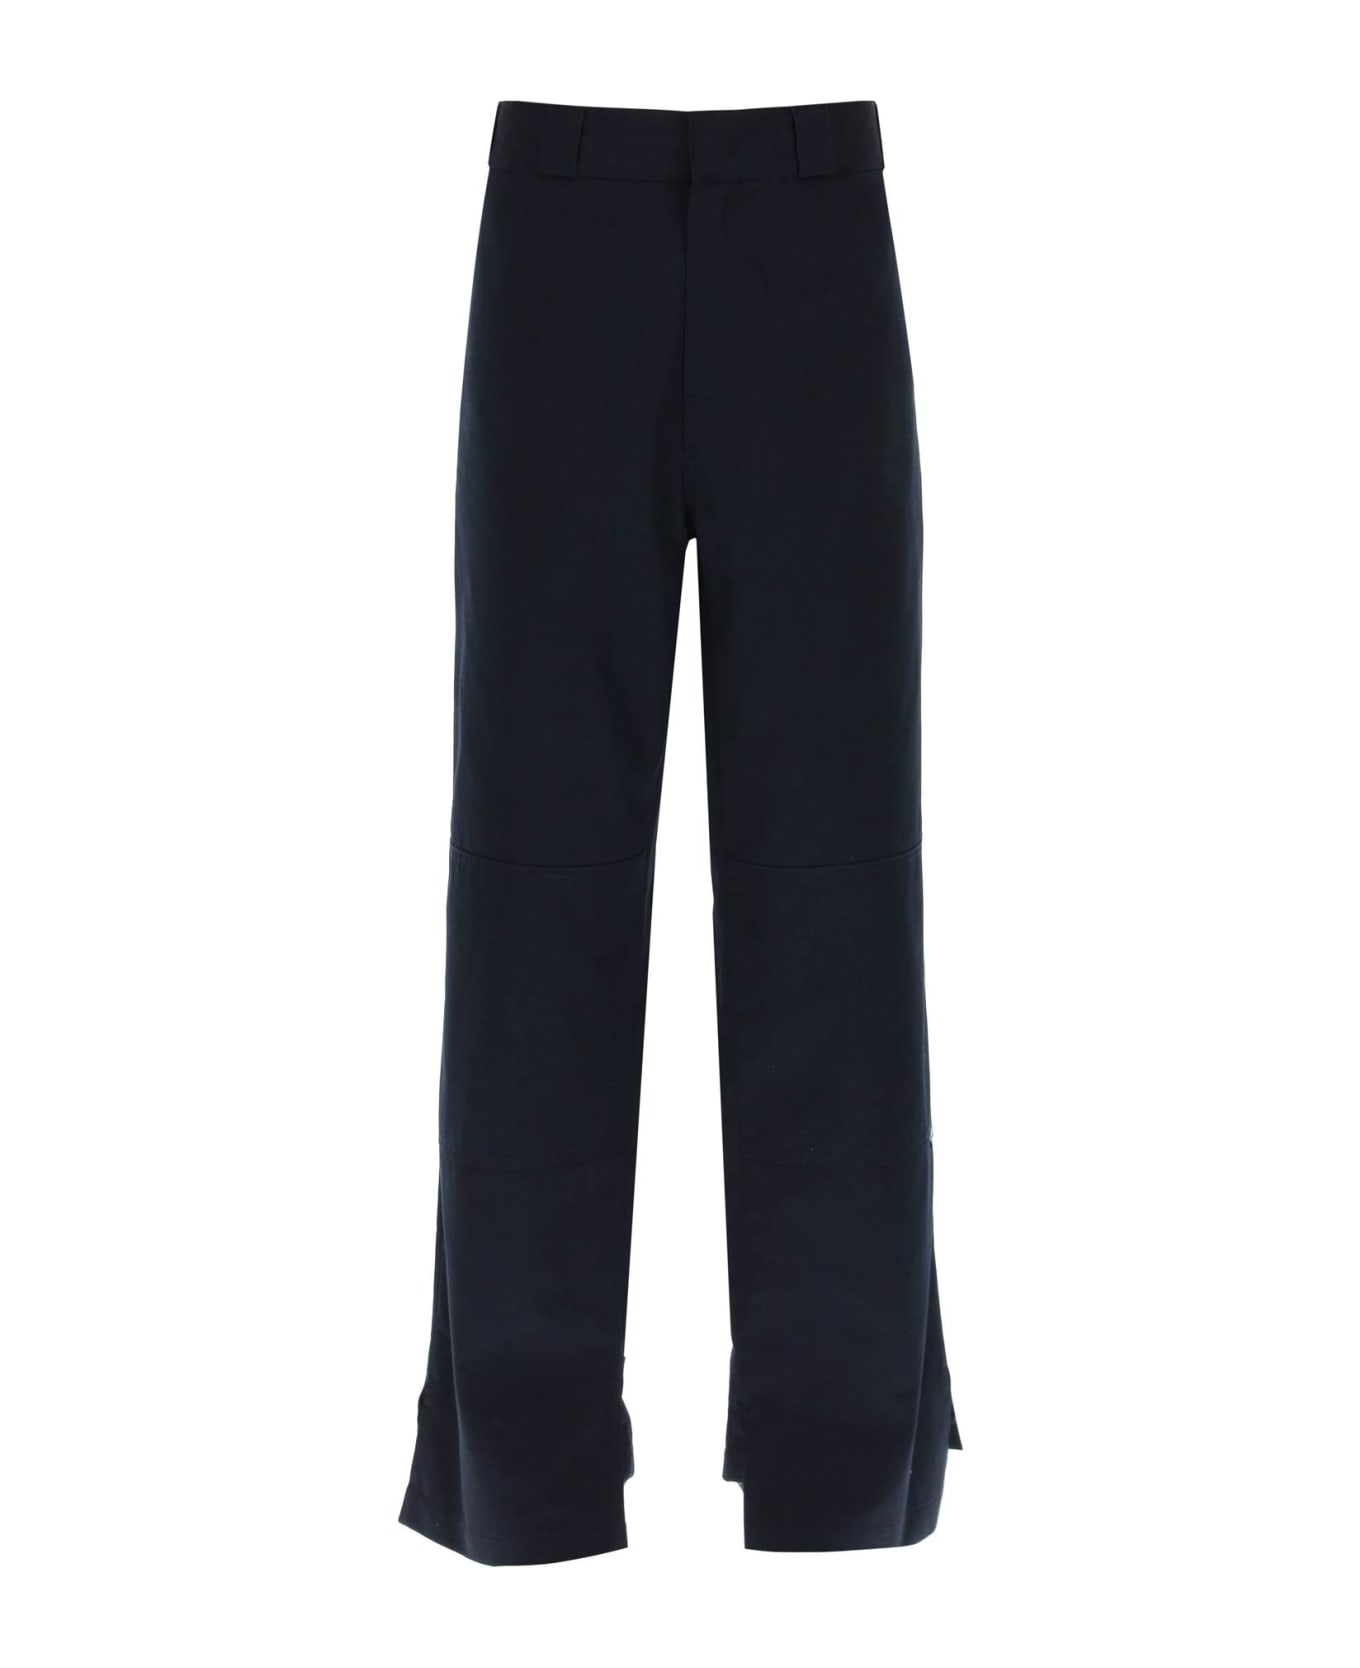 Palm Angels Sartorial Waistband Workpant - NAVY BLUE (Blue) ボトムス